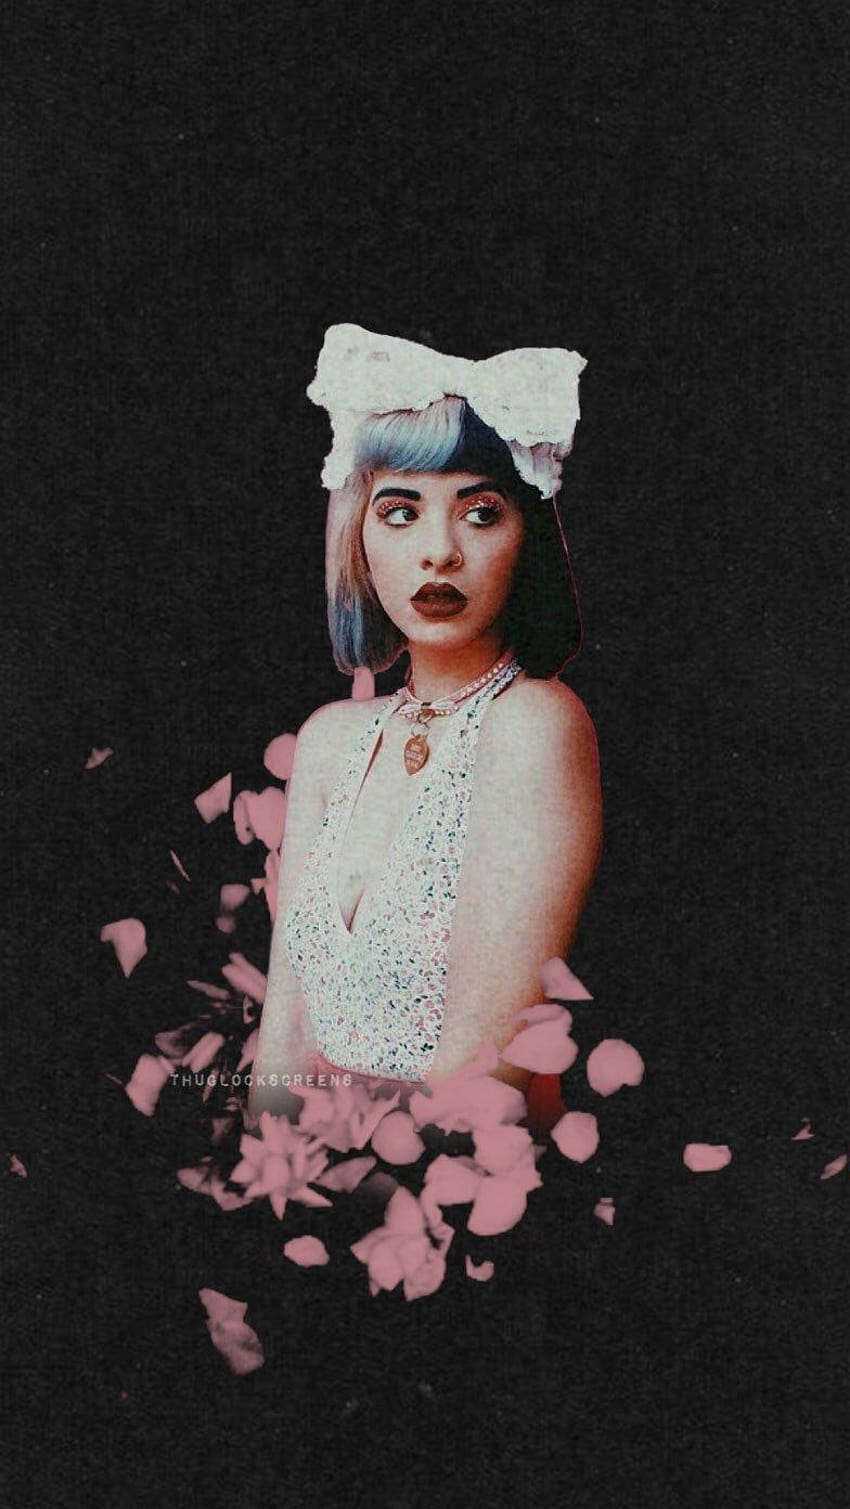 IPhone wallpaper of Maisie Williams as a character from the TV show Game of Thrones. - Melanie Martinez